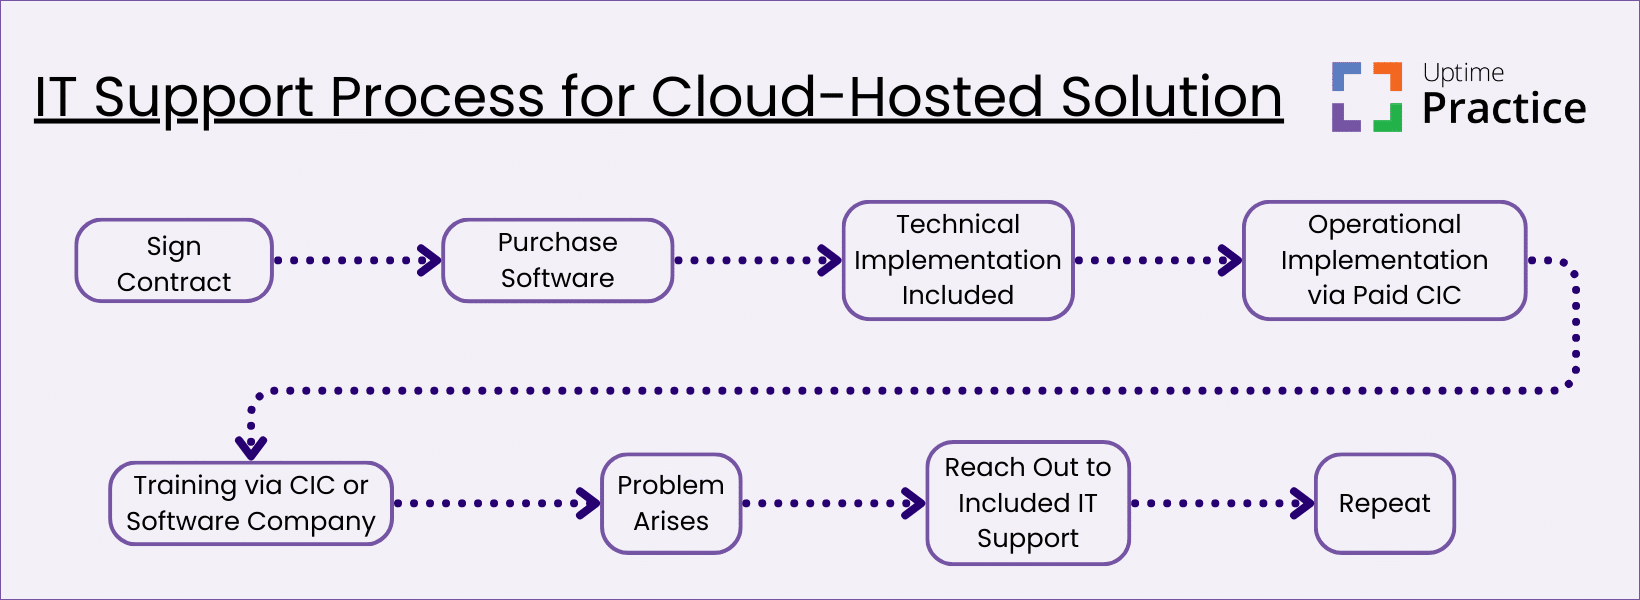 IT Support for Cloud-Hosted Solutions